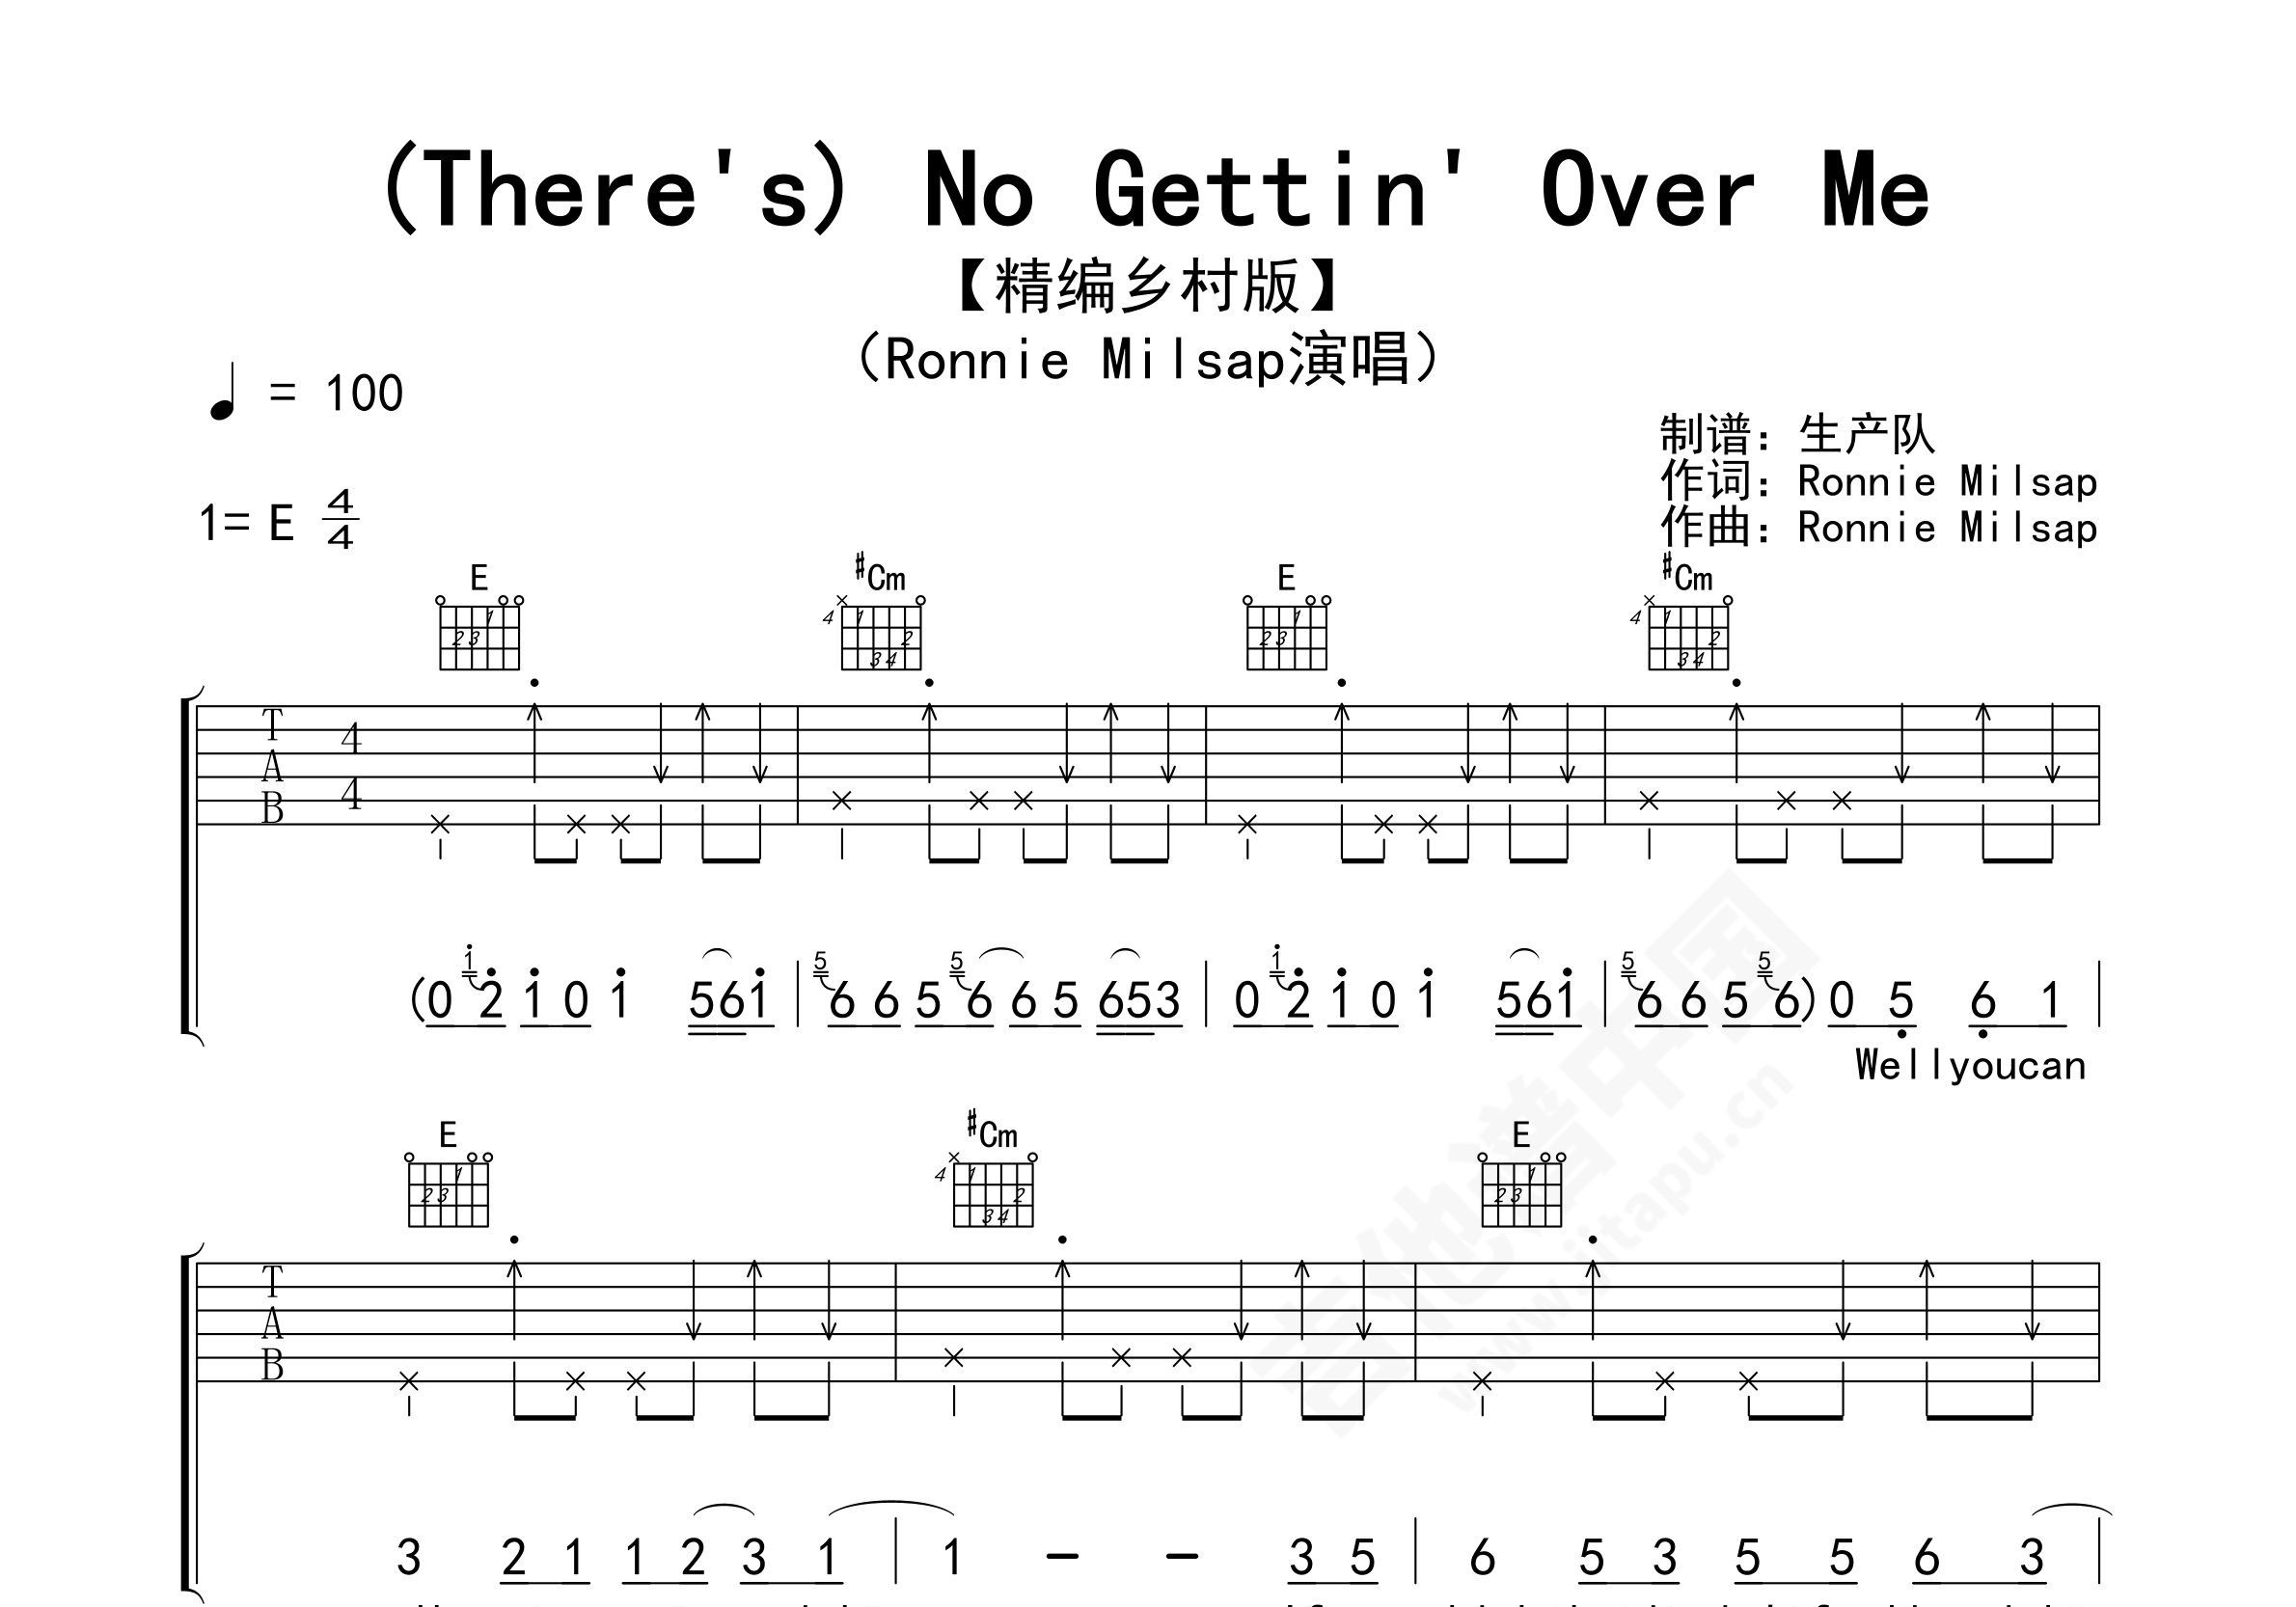 (There's) No Gettin' Over Me